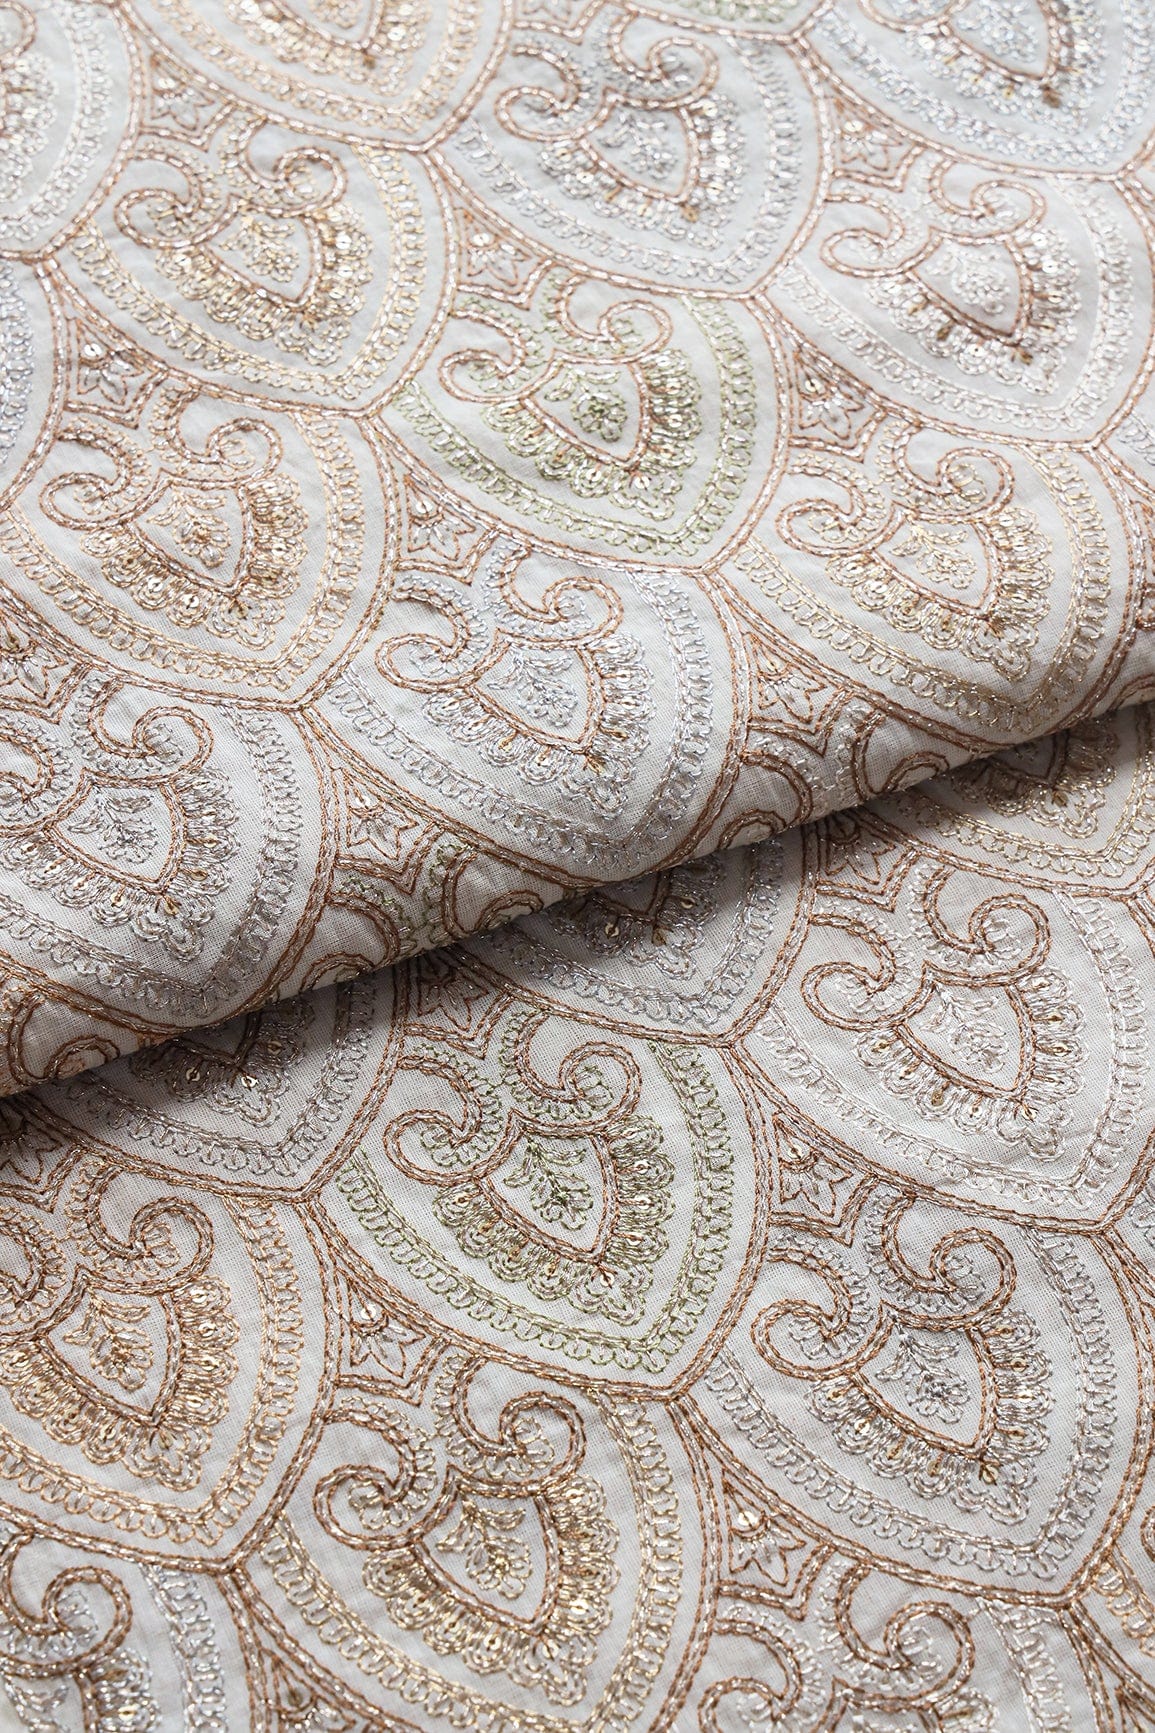 doeraa Embroidery Fabrics Brown Thread With Zari And Gold Sequins Trellis Embroidery On Off White Organic Cotton Fabric